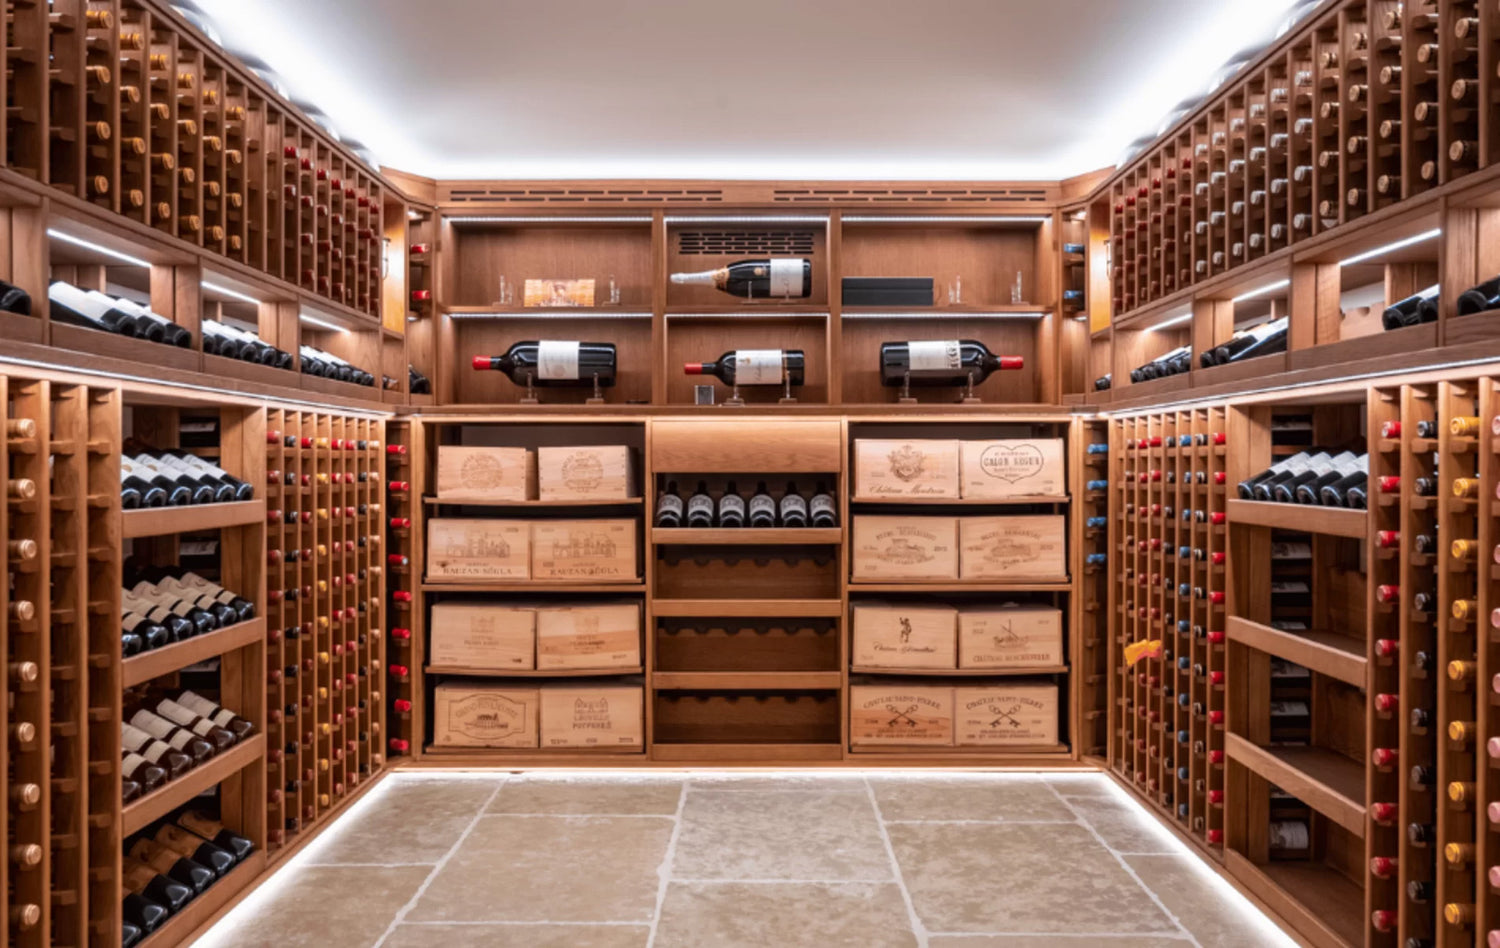 Try our new Cellar Plan